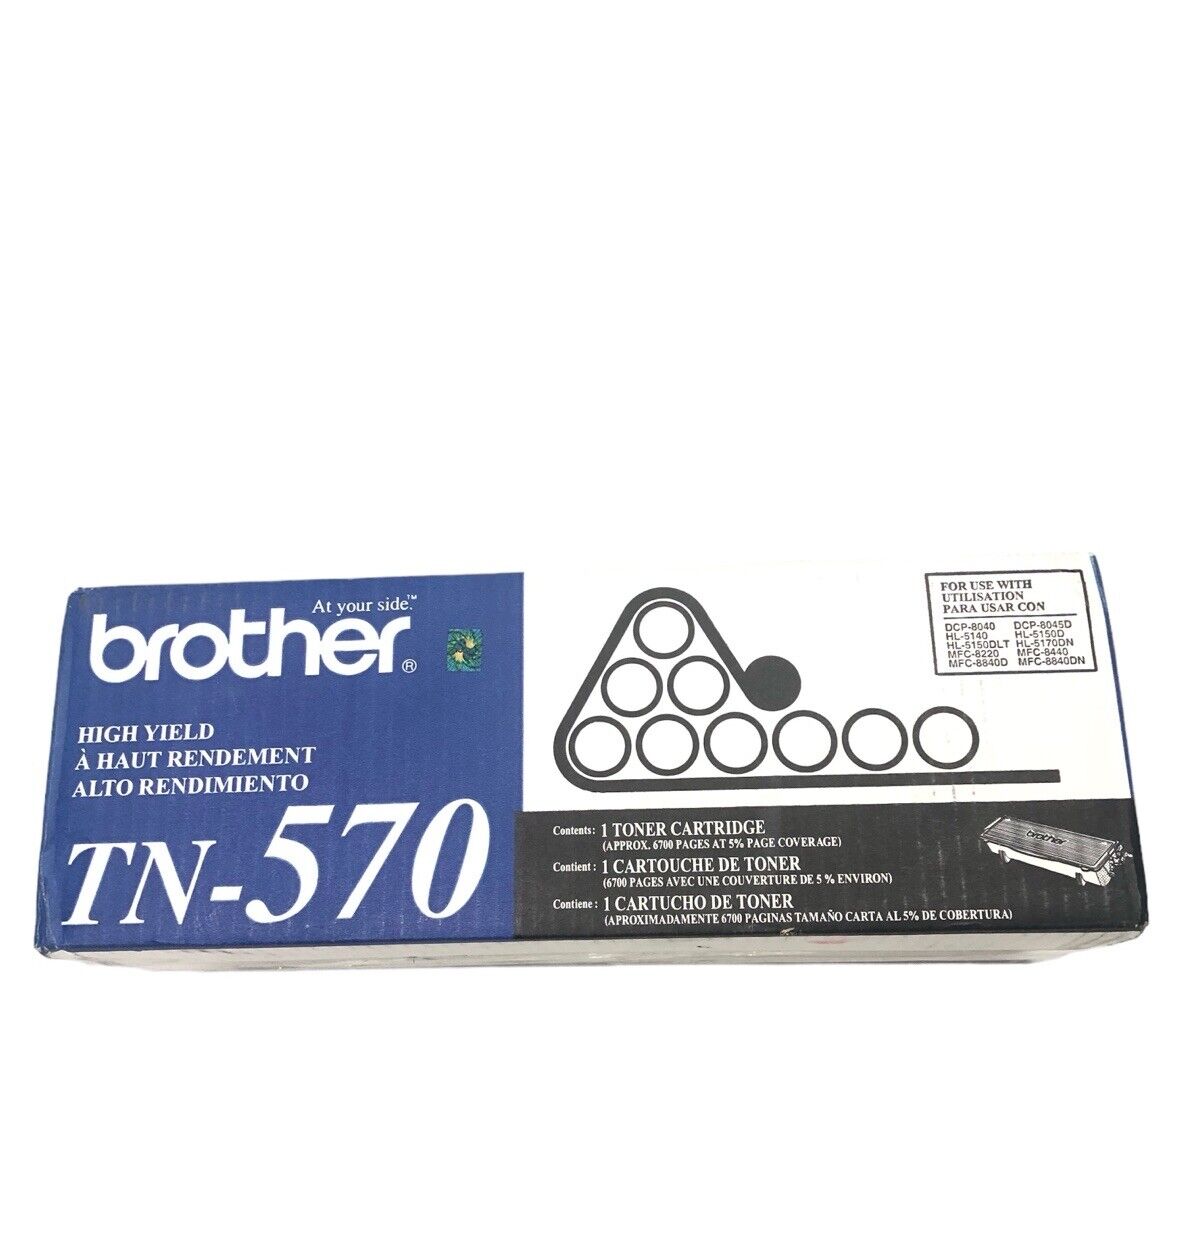 GENUINE BROTHER TN-570 Toner Cartridge Black For DCP-8040 DCP-8045D NEW SEALED -